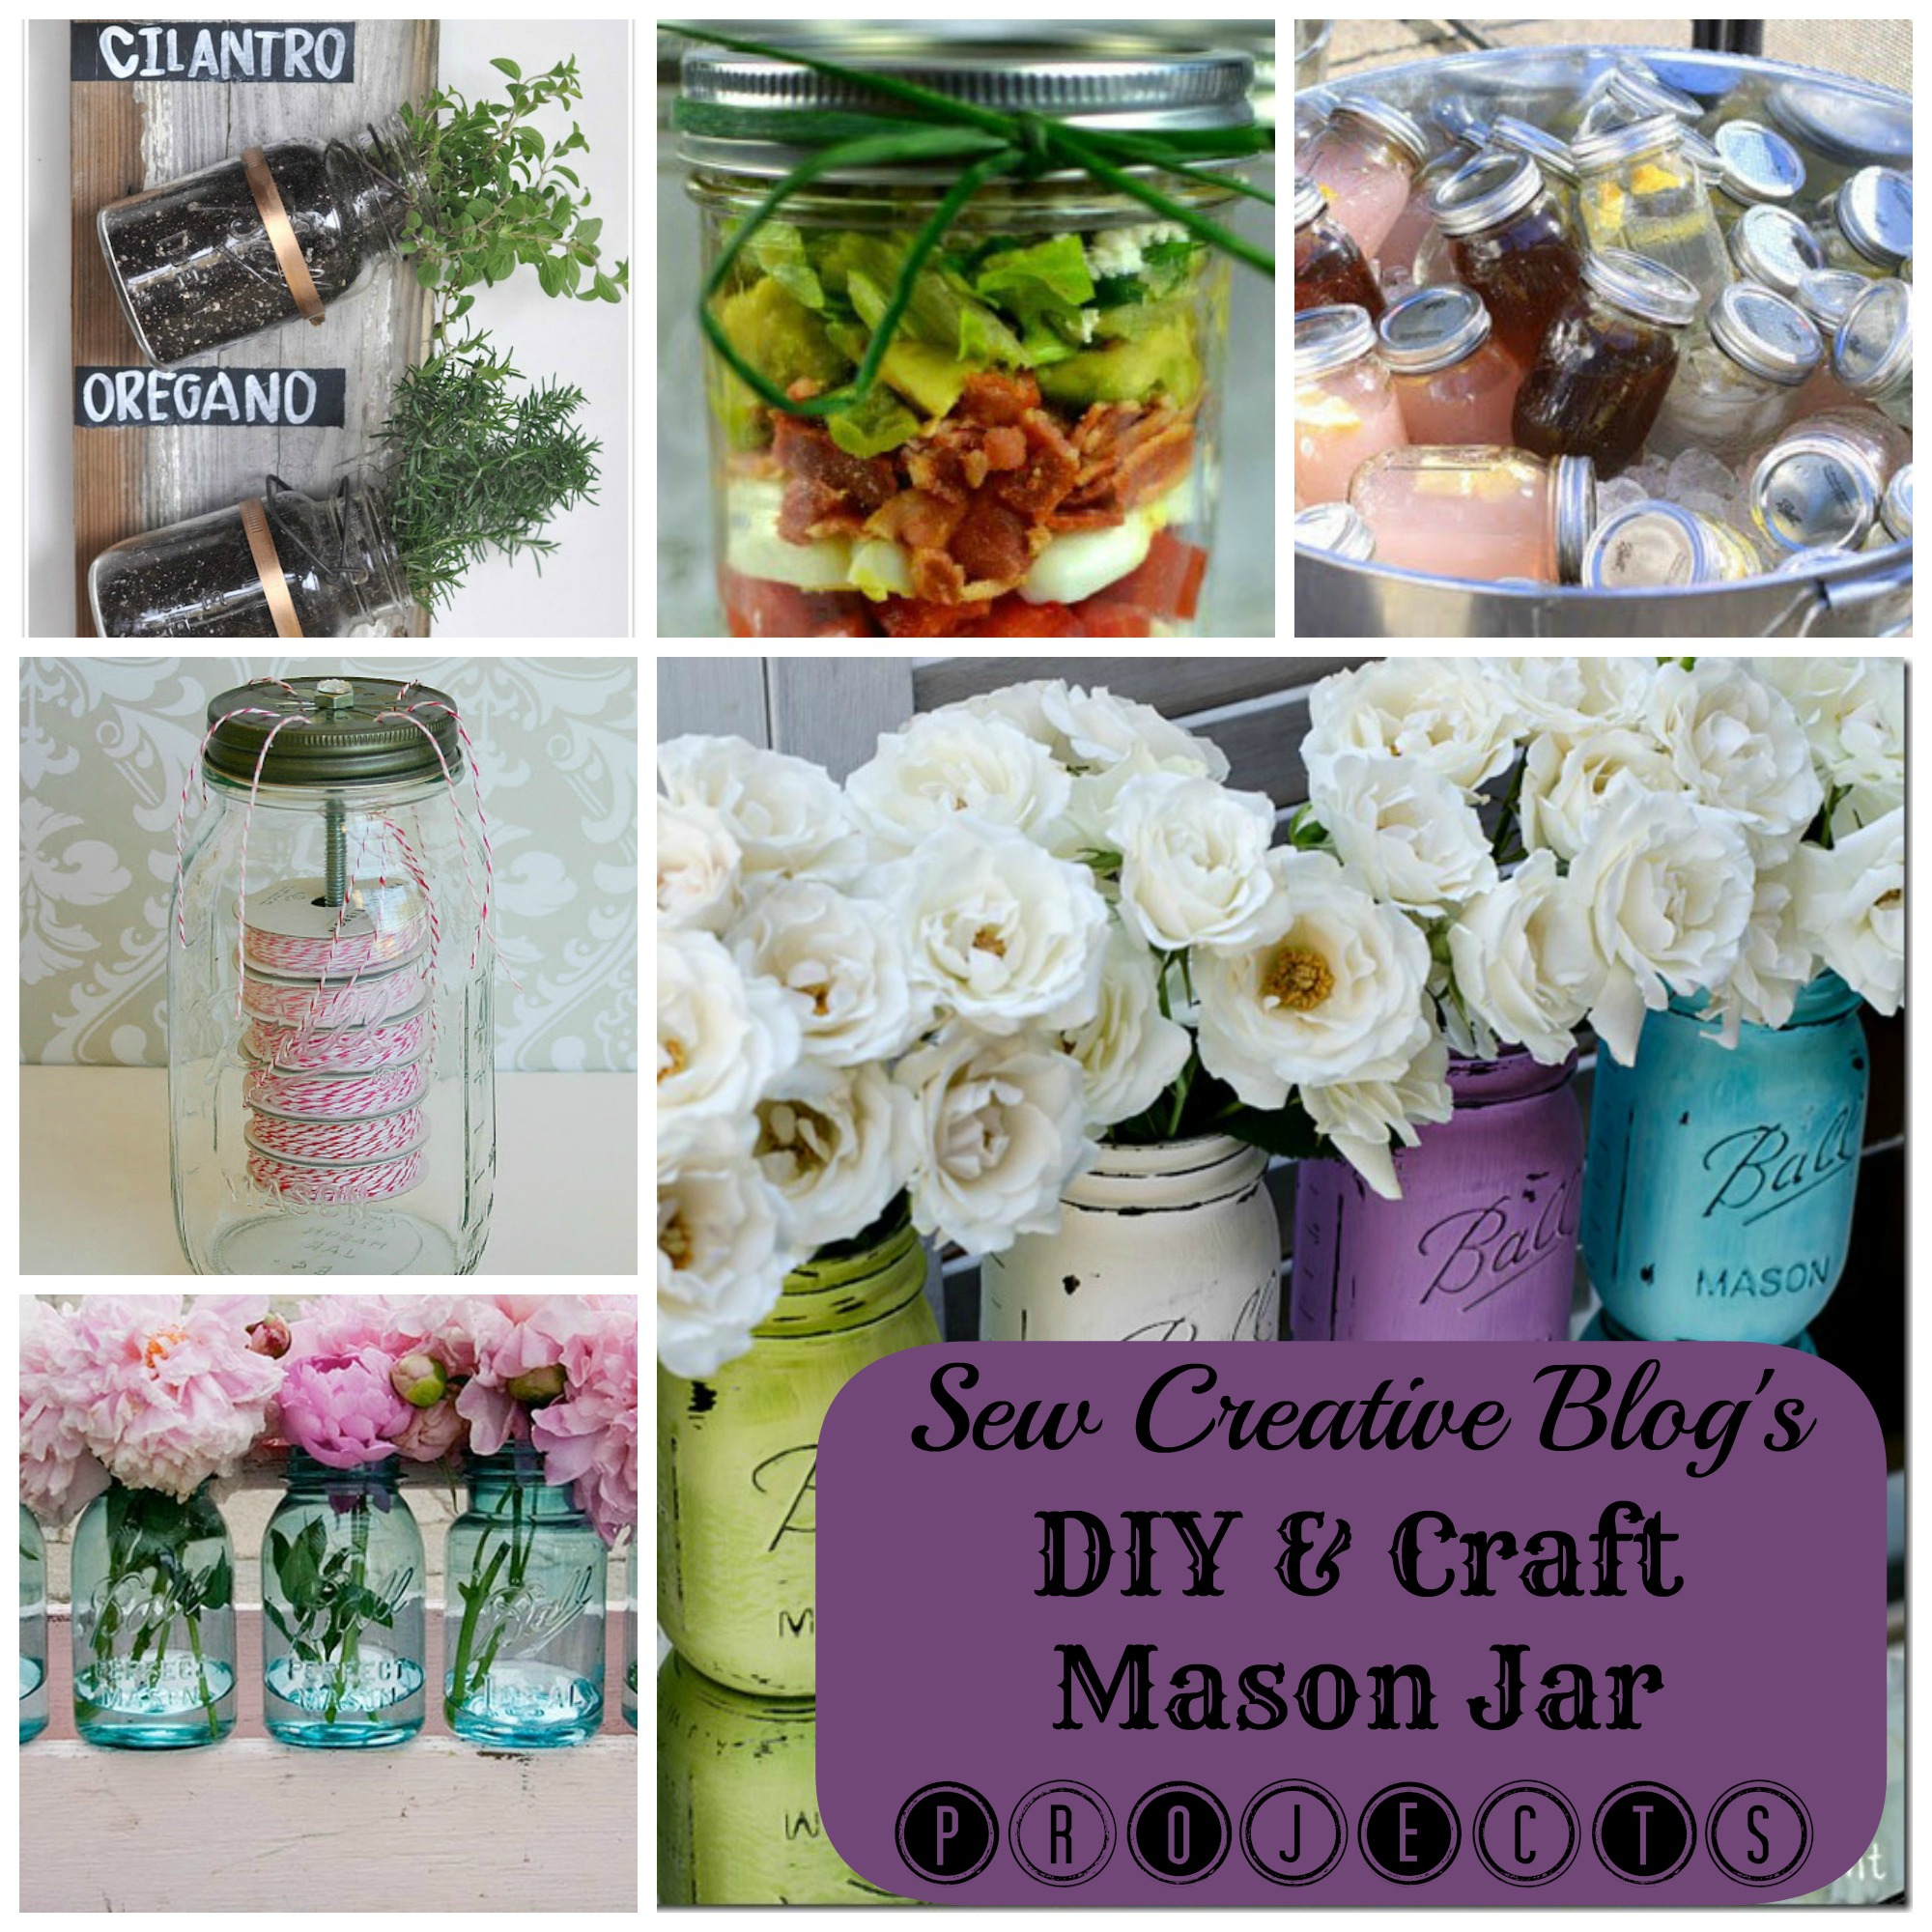 DIY and Craft Mason Jar Projects From Sew Creative